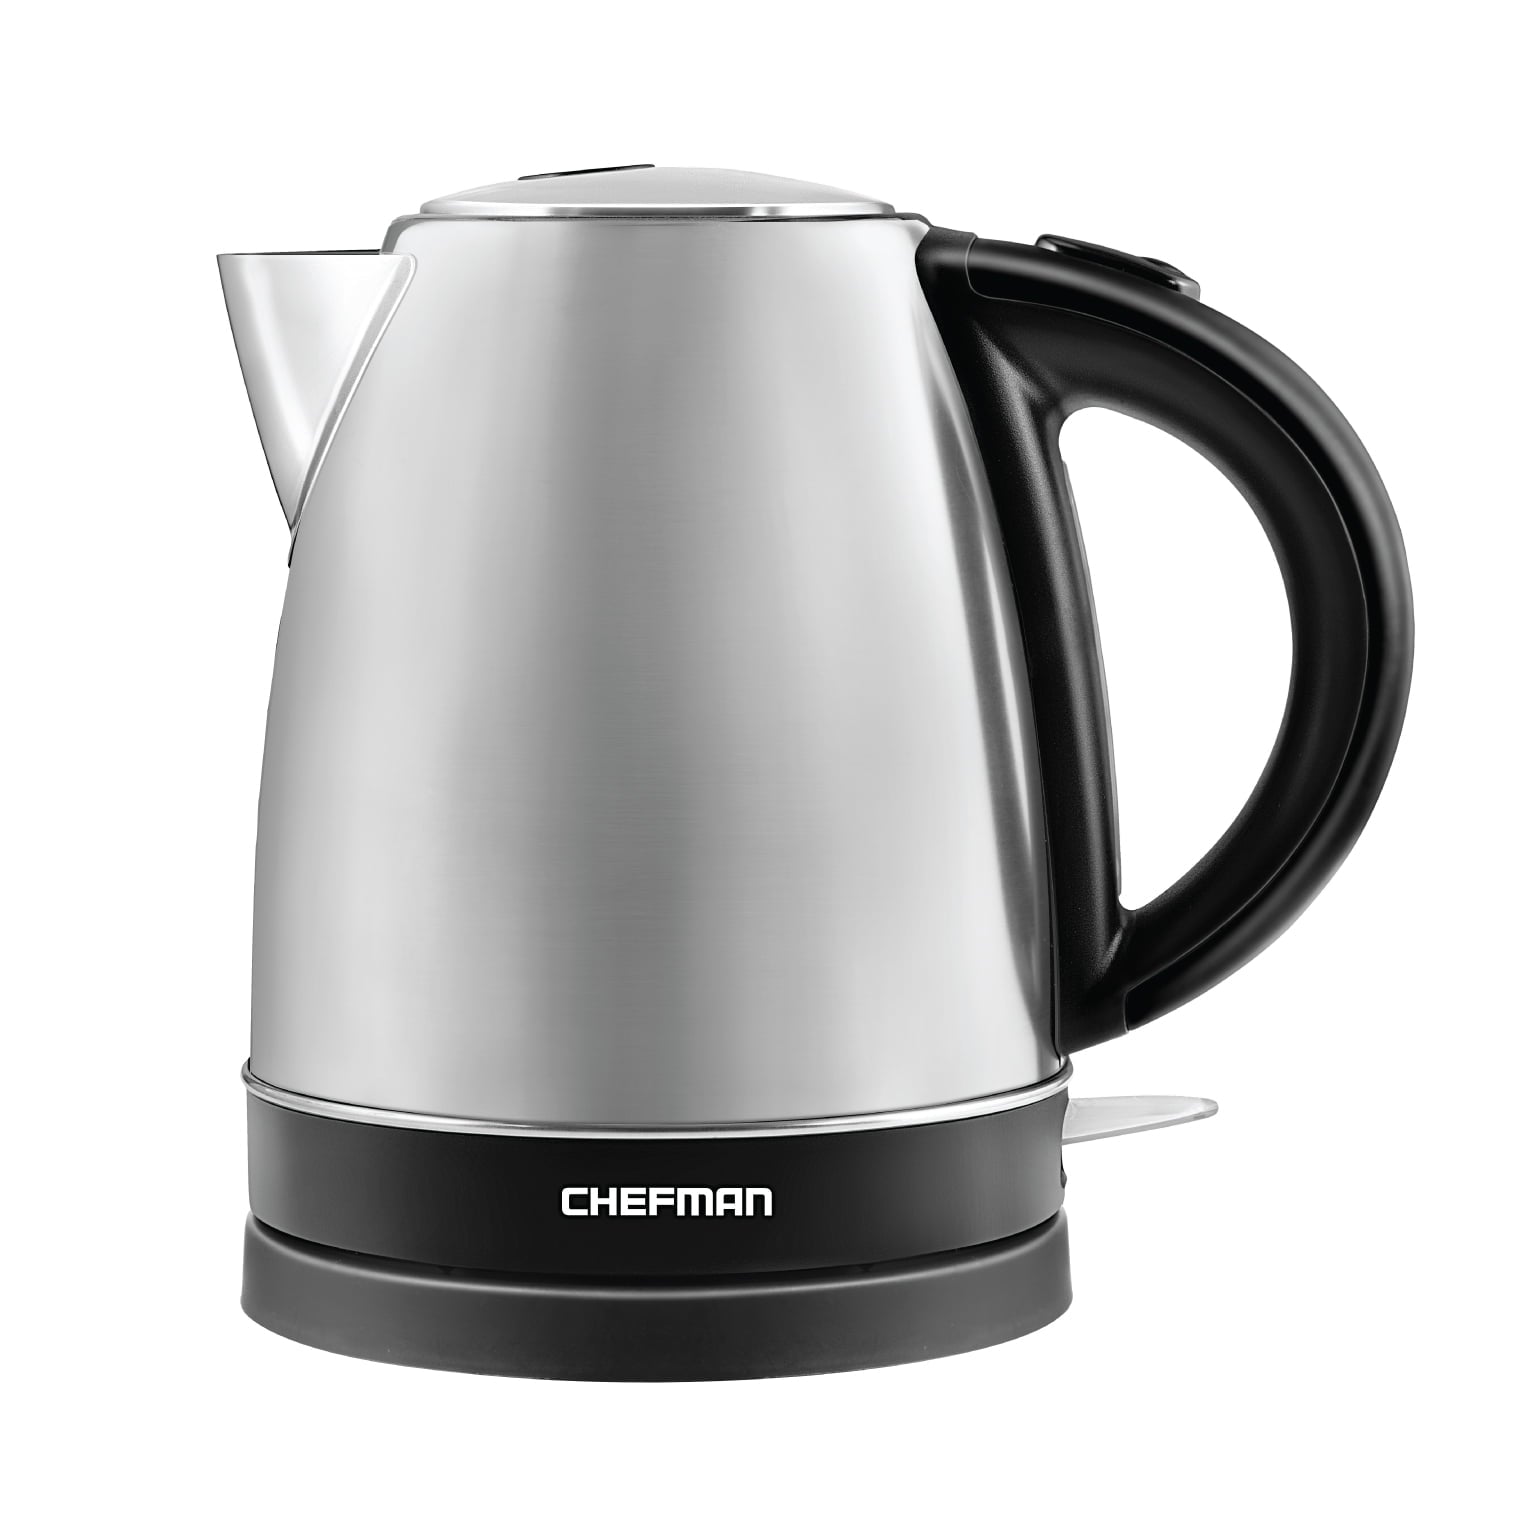 Beautiful 1.7l One-Touch Electric Kettle Black Sesame by Drew